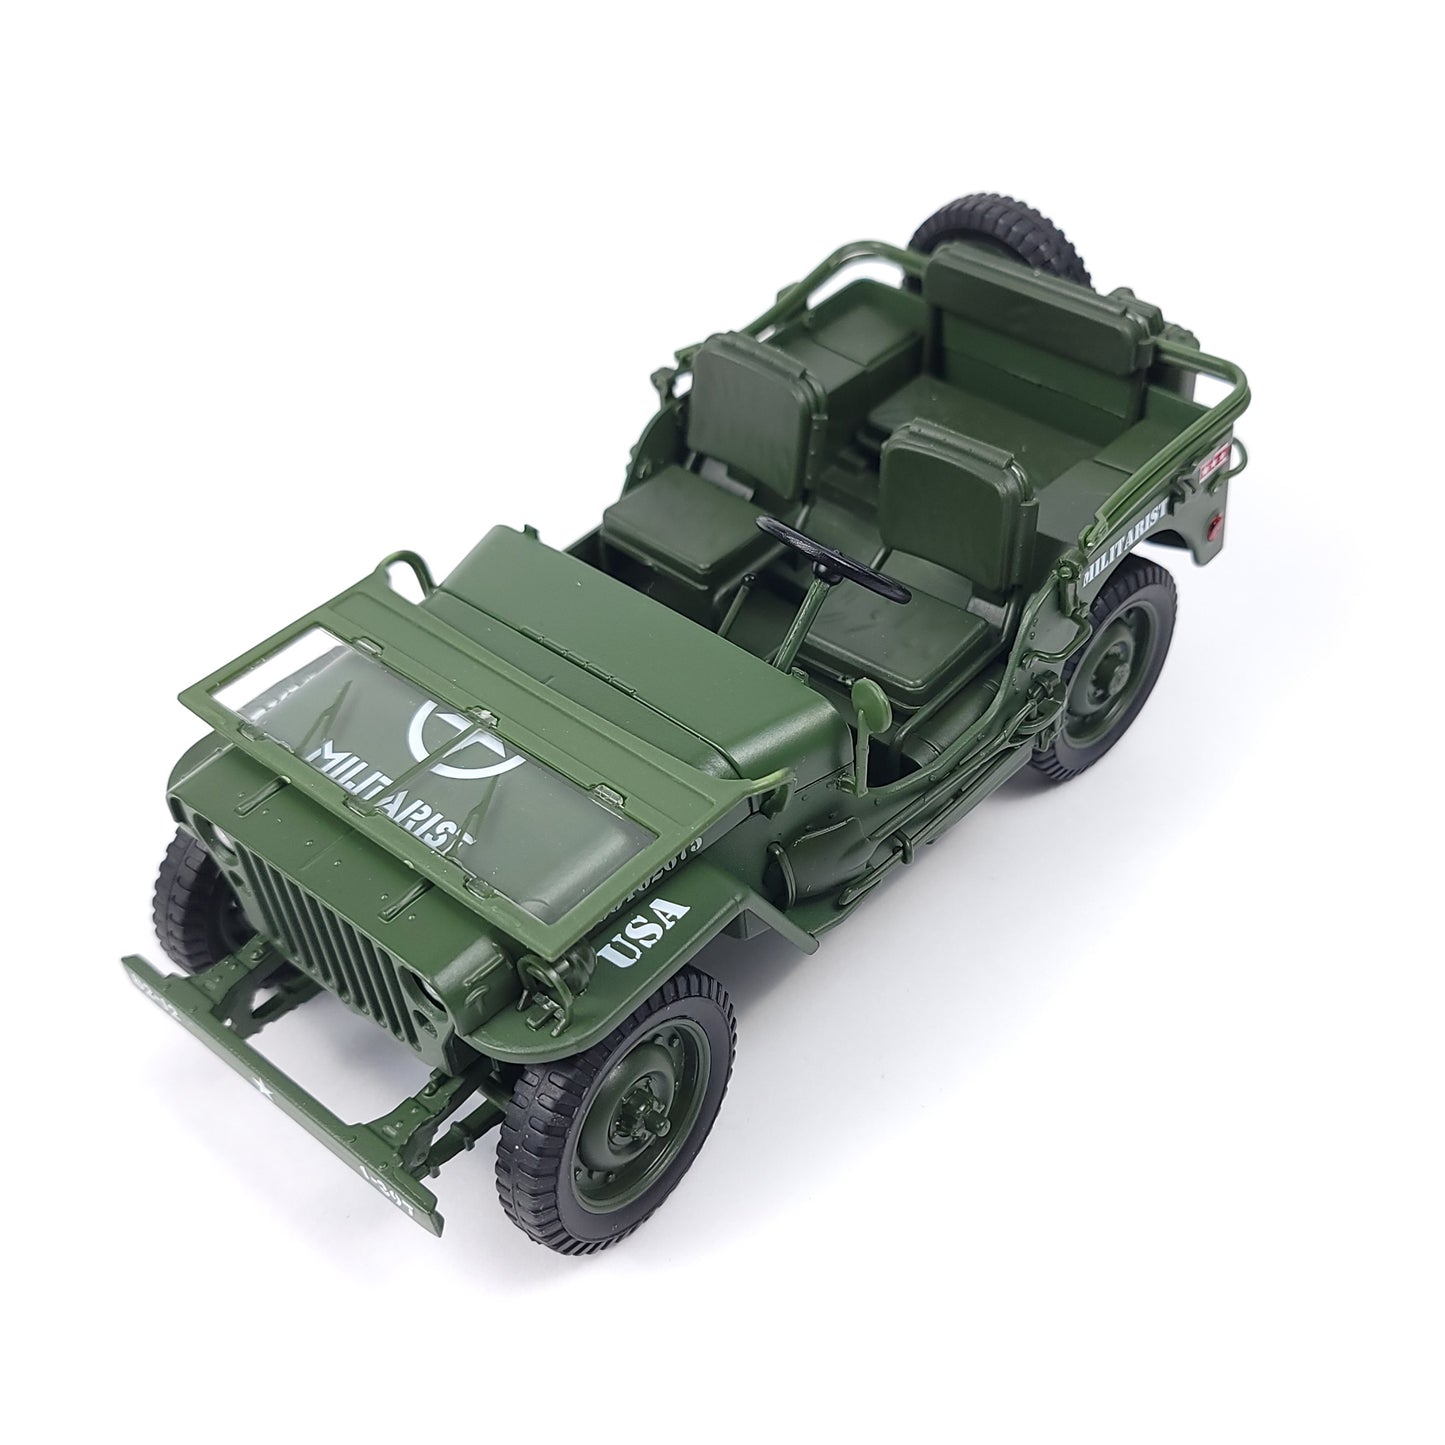 1:18 Scale Willis Tactical Jeep Model Car Metal Diecast Military Armored Vehicle Battlefield GP Model Toy Collection Gift